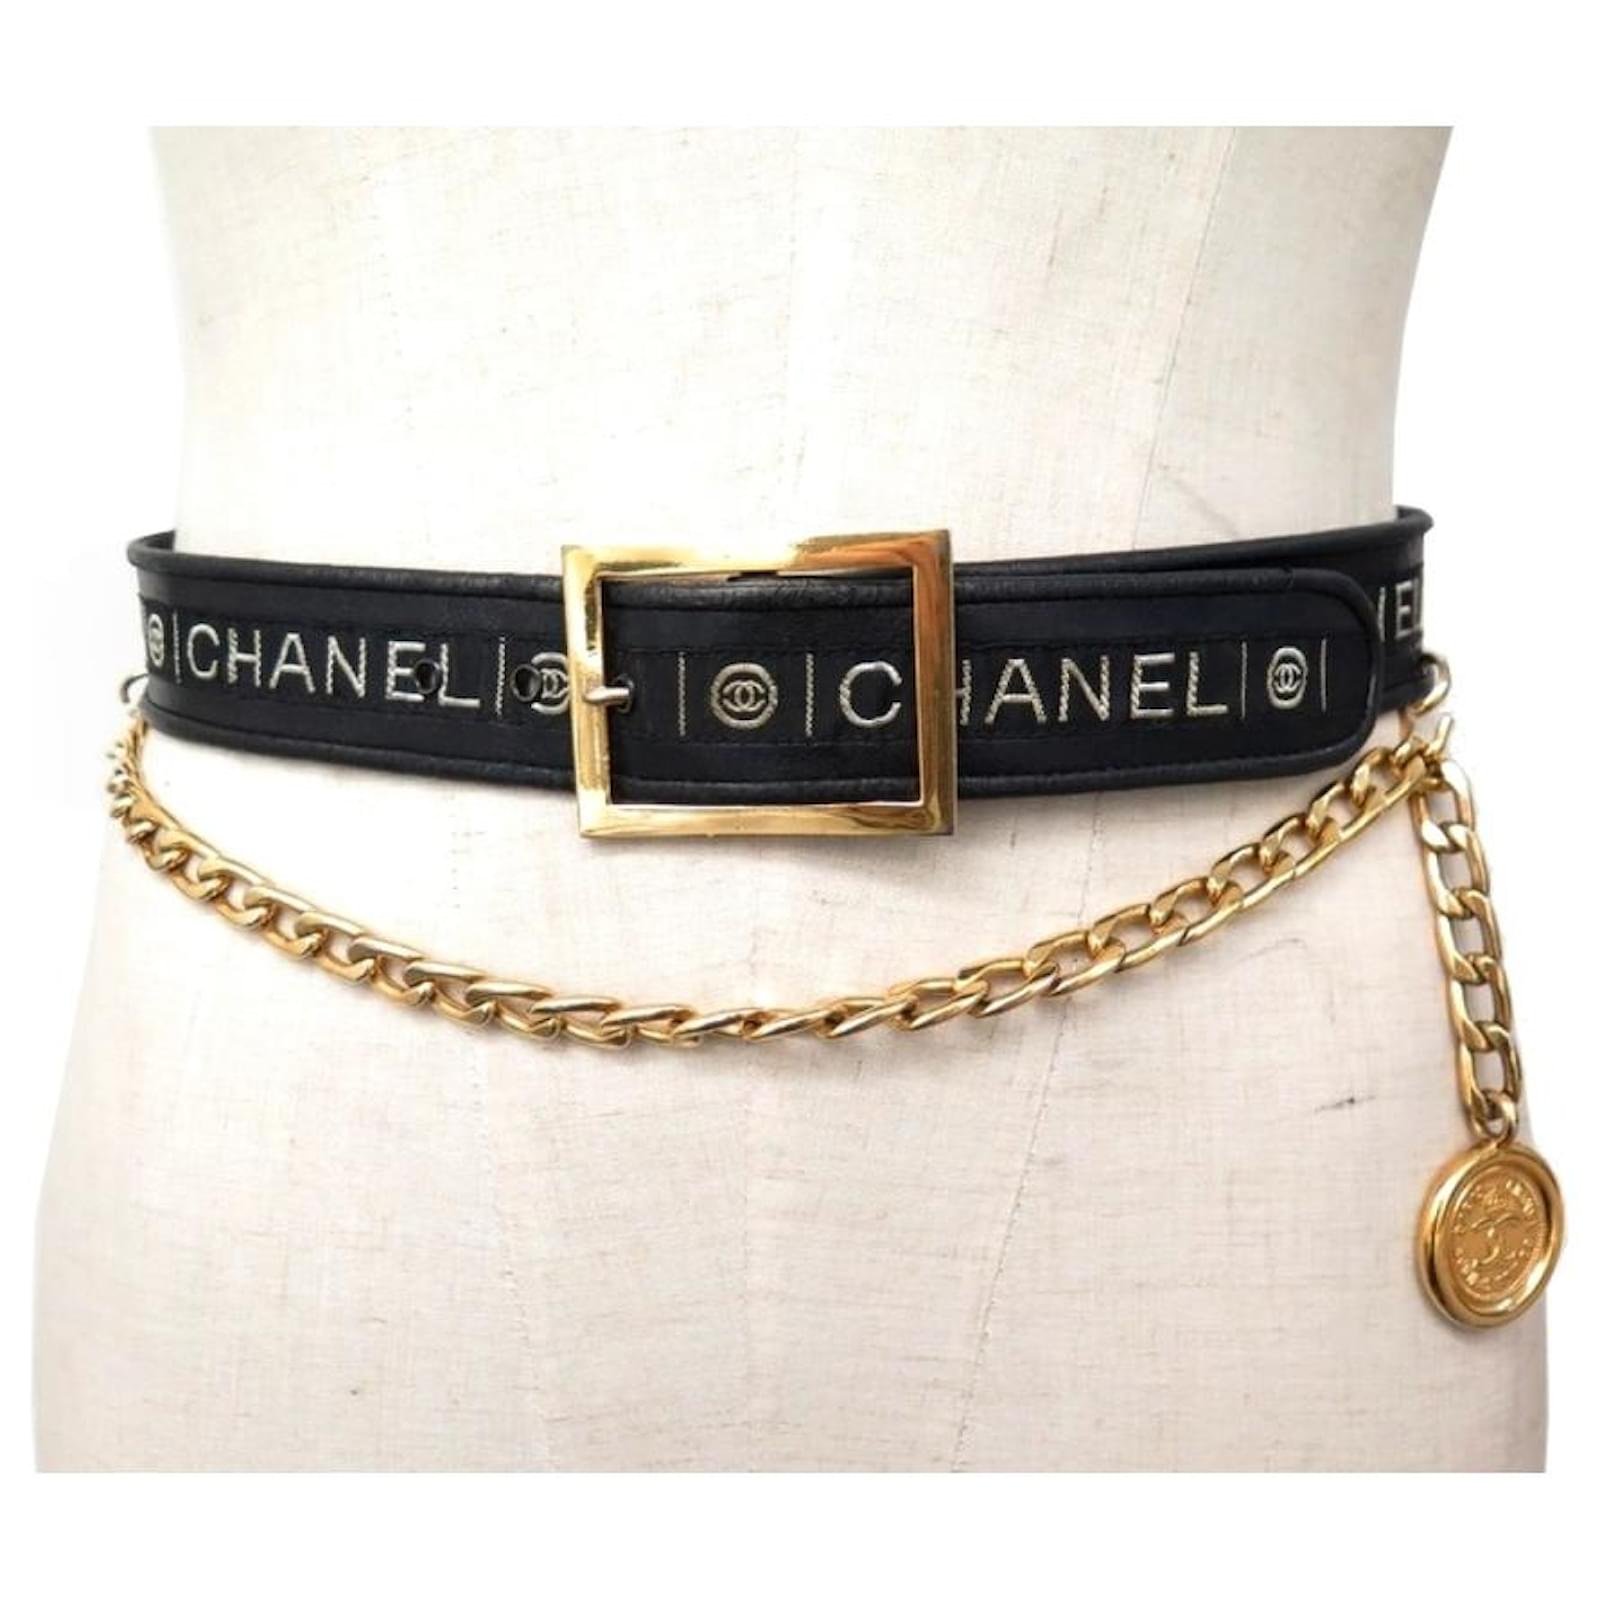 Vintage 80s CHANEL Huge Gold CC Logo Red Leather Waist Belt Buckle  75   30  28 Small  Super Rare Collectors Item